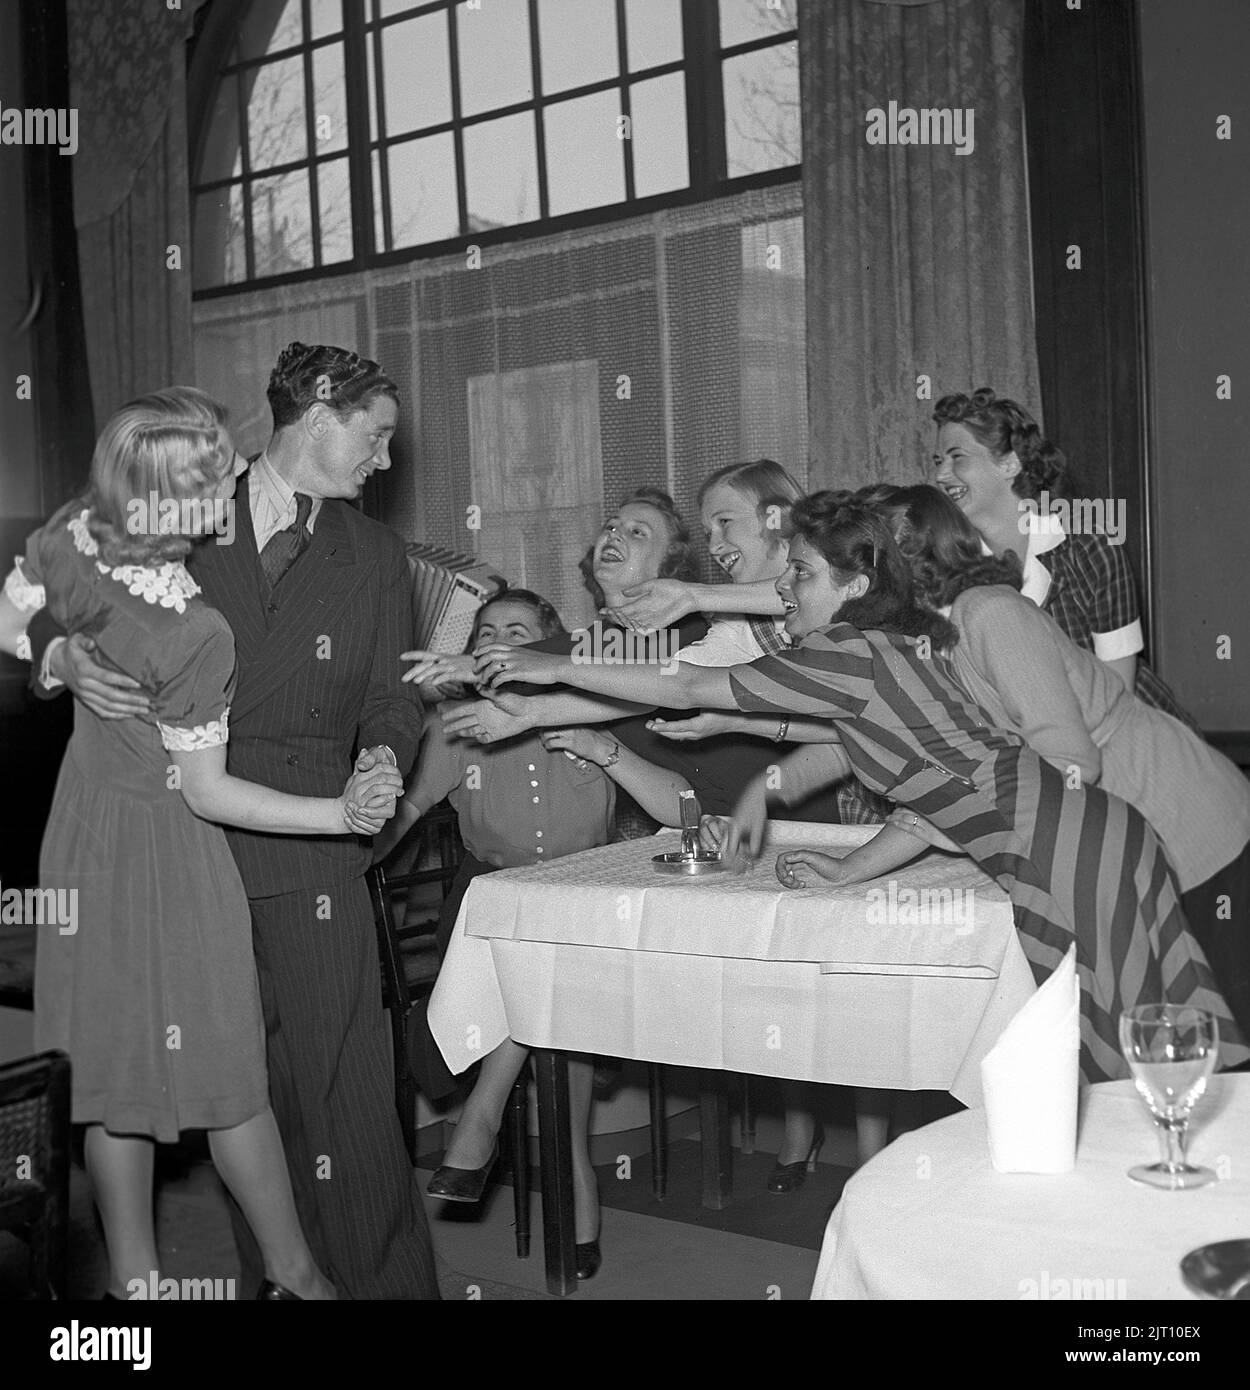 In the 1940s. Seven young women but only one man, and the six that are not dancing reaches out their arms for him. Picture taken in the town Boras where the saying is that there is a shortage of single men.  Only one free and single man on seven women.  Sweden 1942. Photo Kristoffersson ref A50-3 Stock Photo